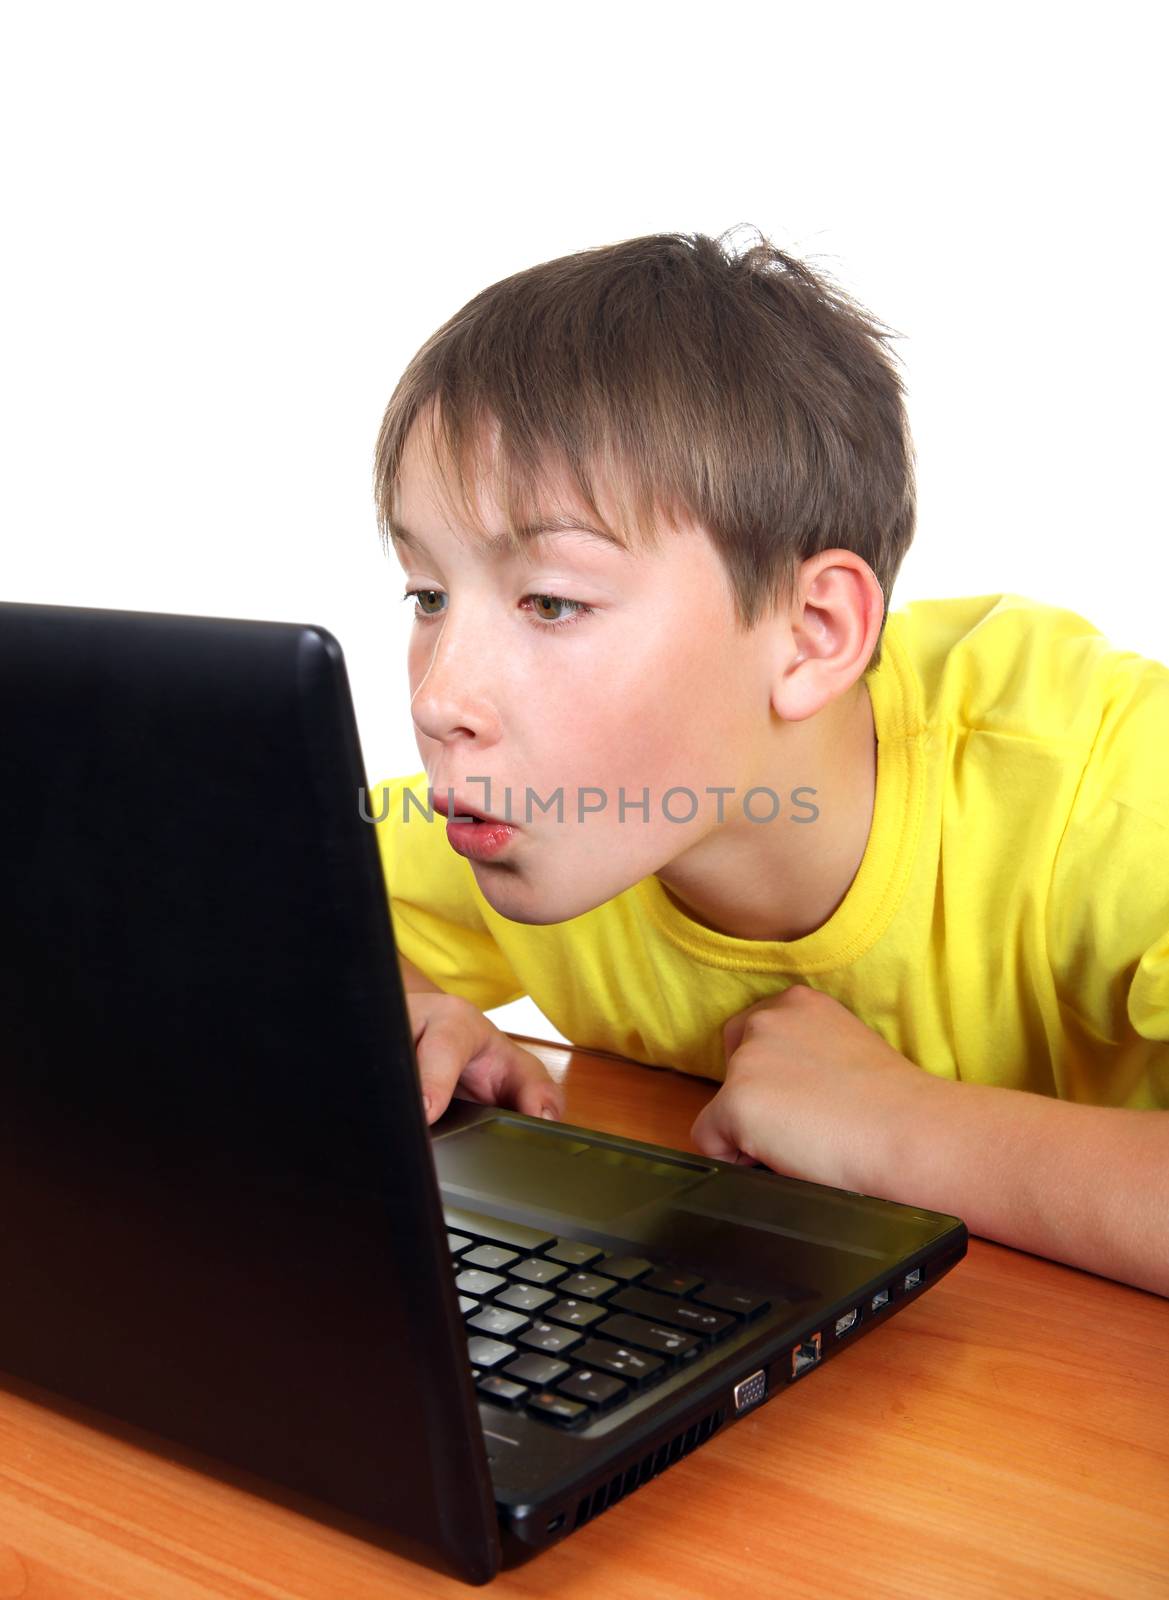 Surprised Kid with Laptop Isolated on the White Background